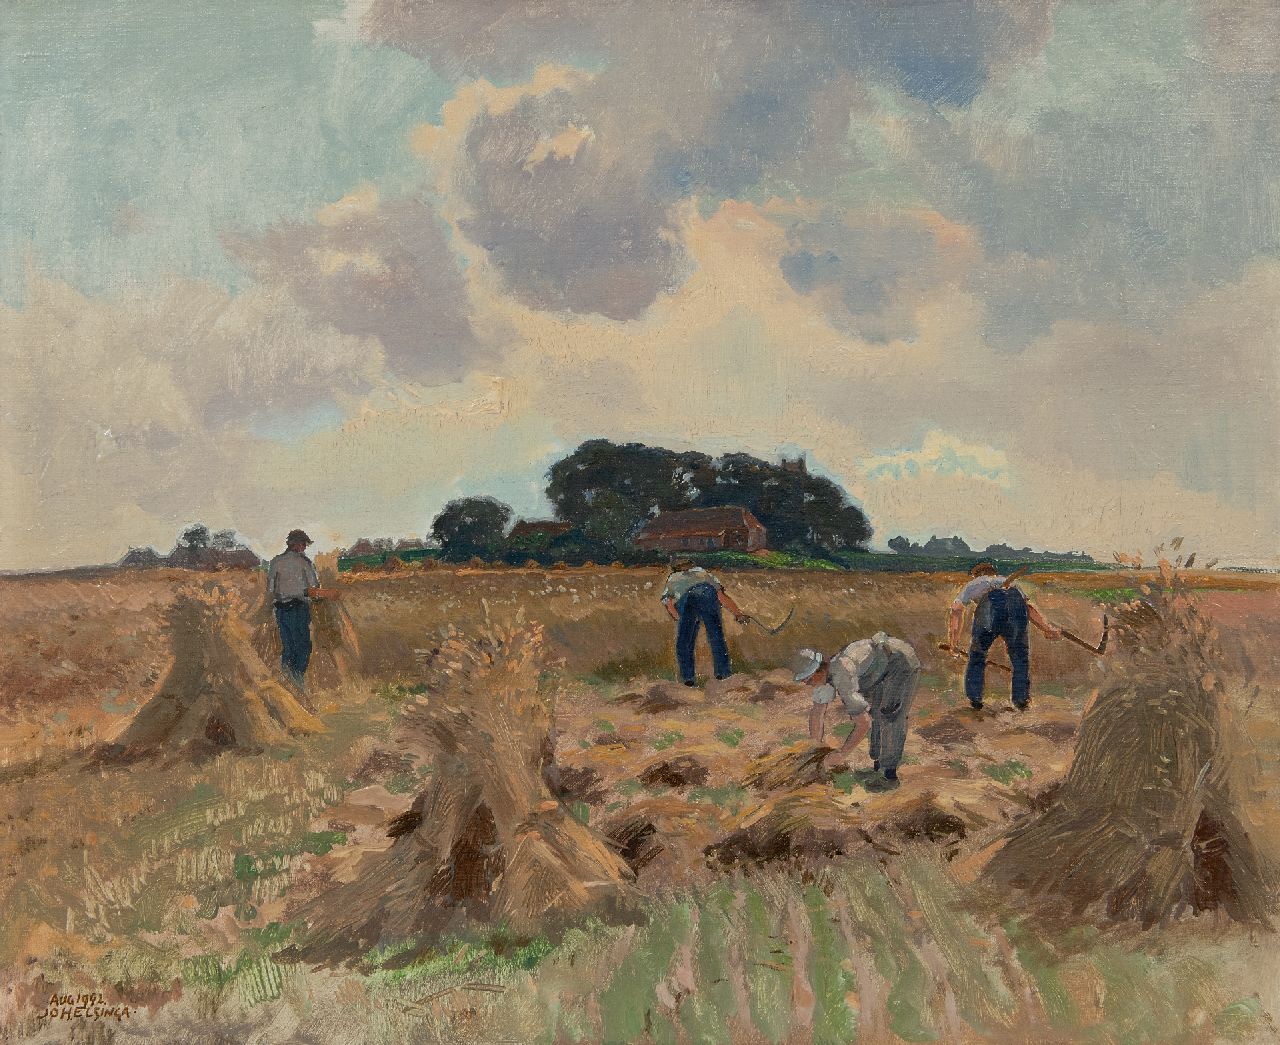 Joh Elsinga | Harvest time, oil on canvas, 46.1 x 56.1 cm, signed l.l. and dated Aug 1942